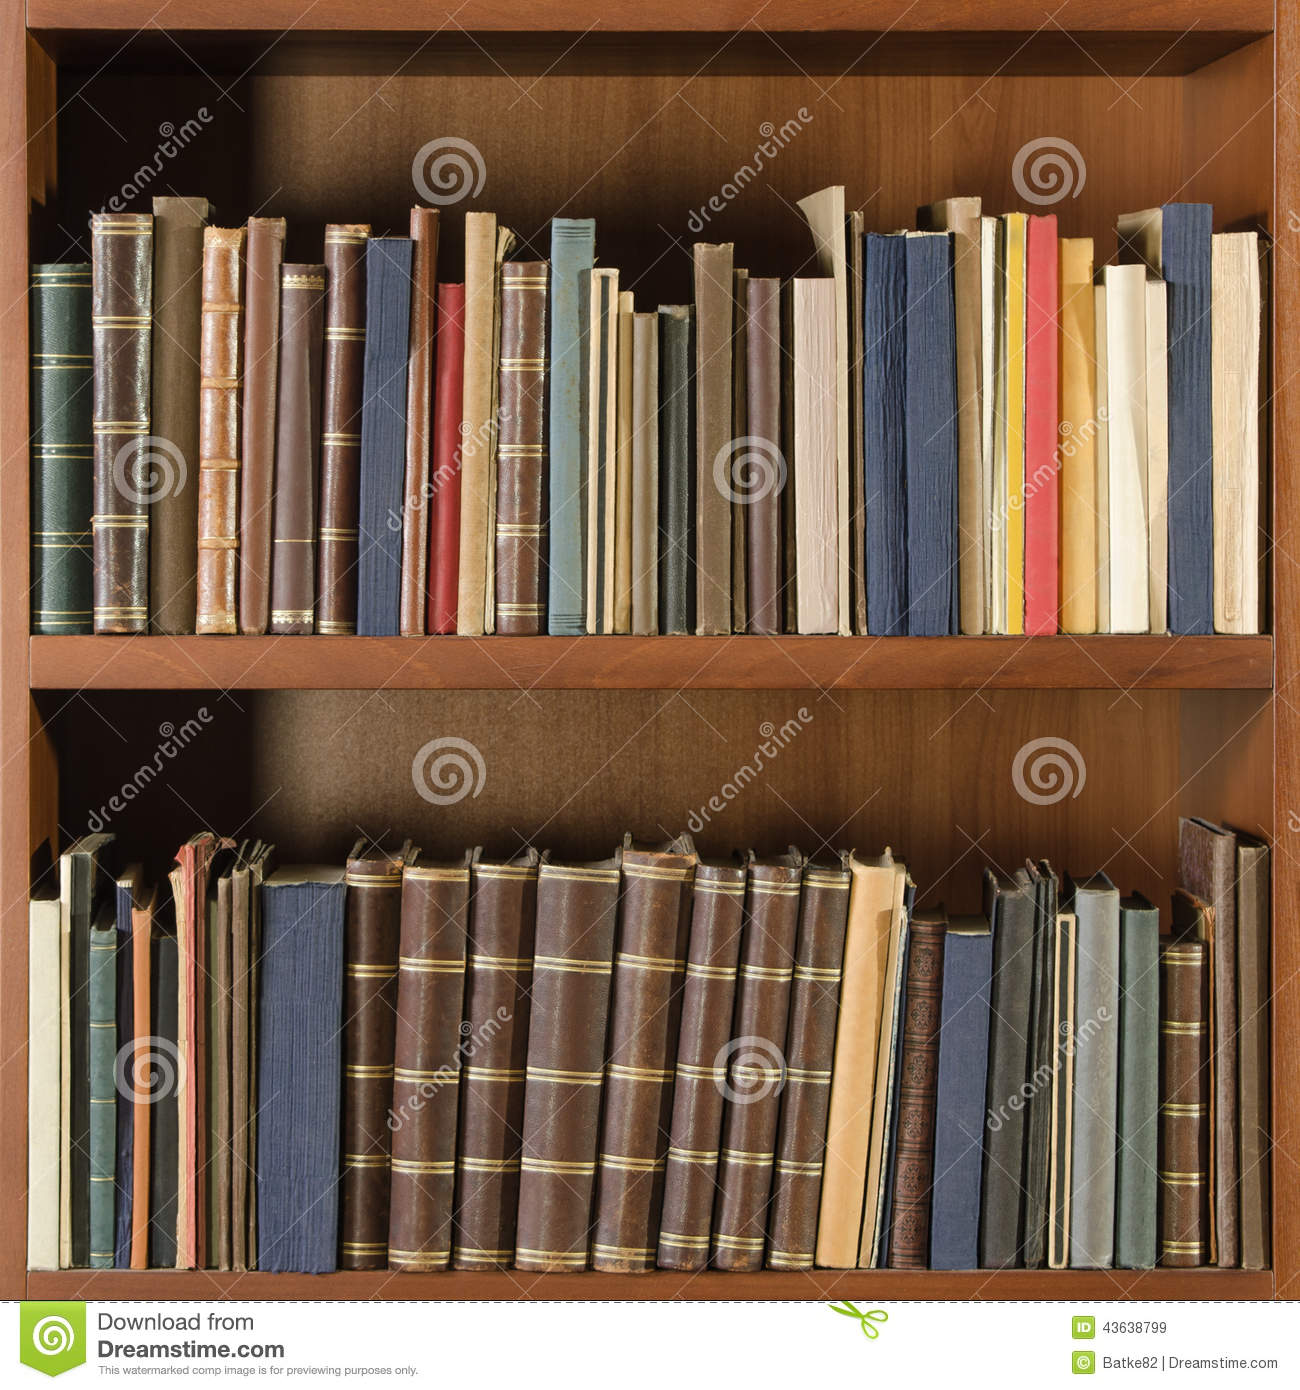 Old Books In Library Shelf   Square Composition Stock Photo   Image